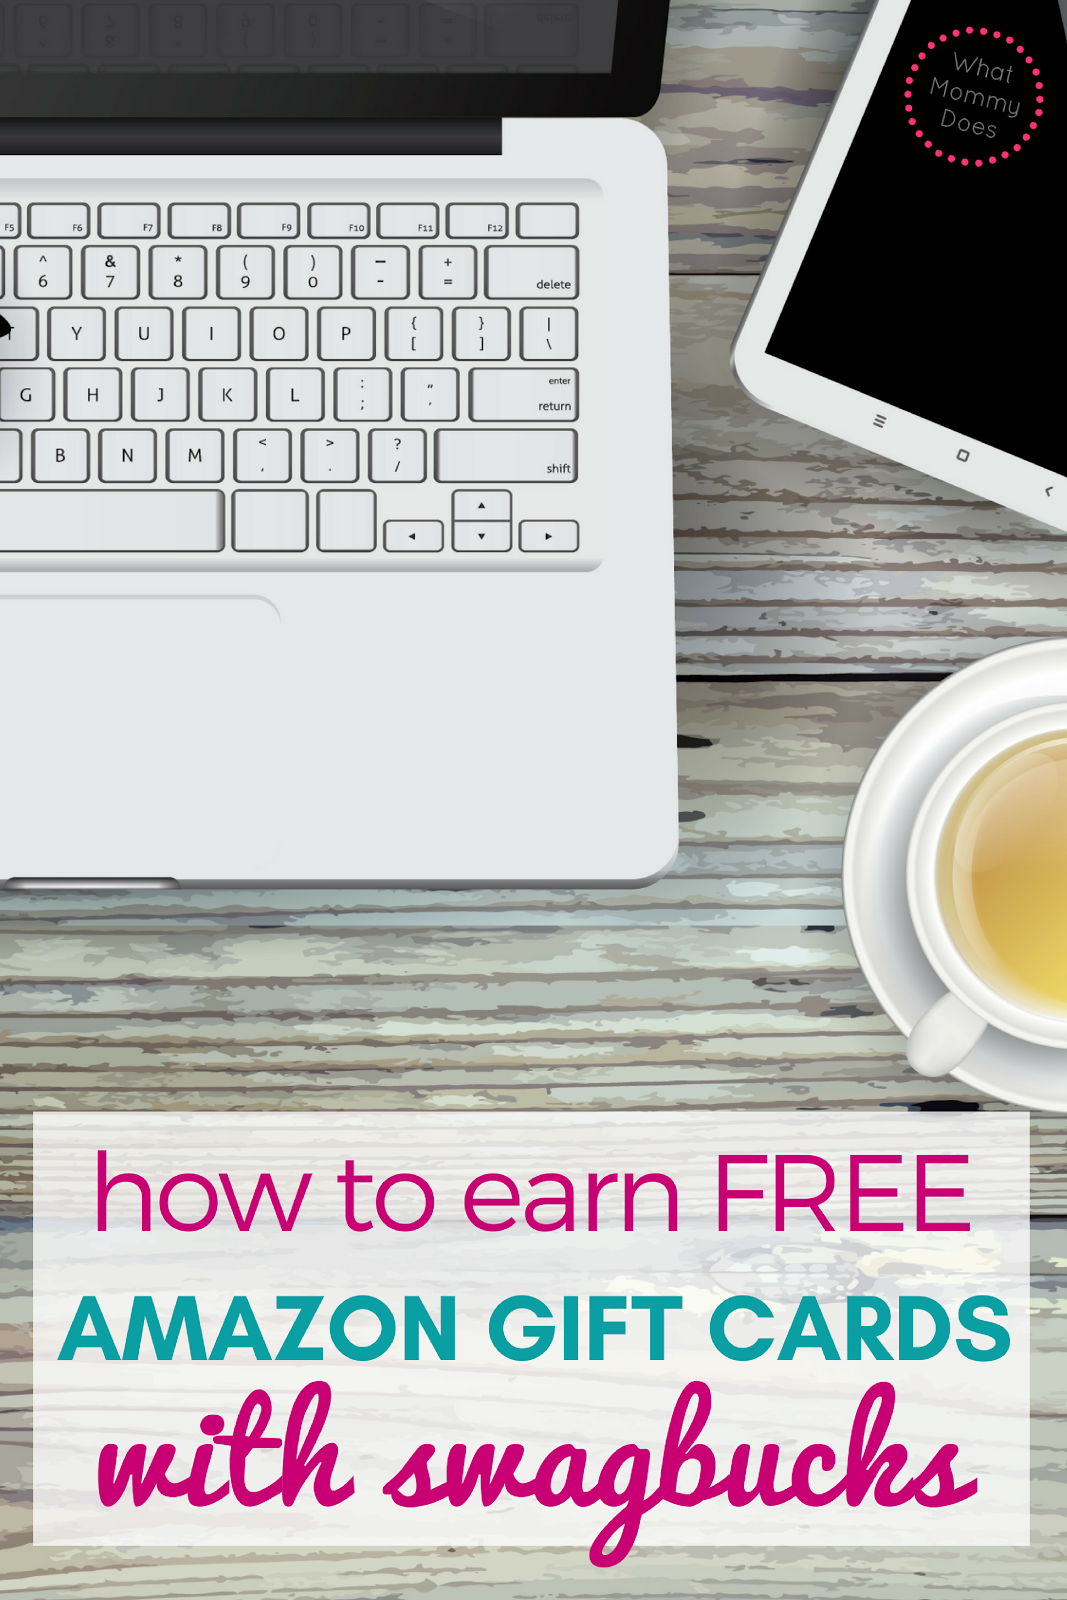 How to Use Swagbucks & Earn Free Amazon Gift Cards | What Mommy Does